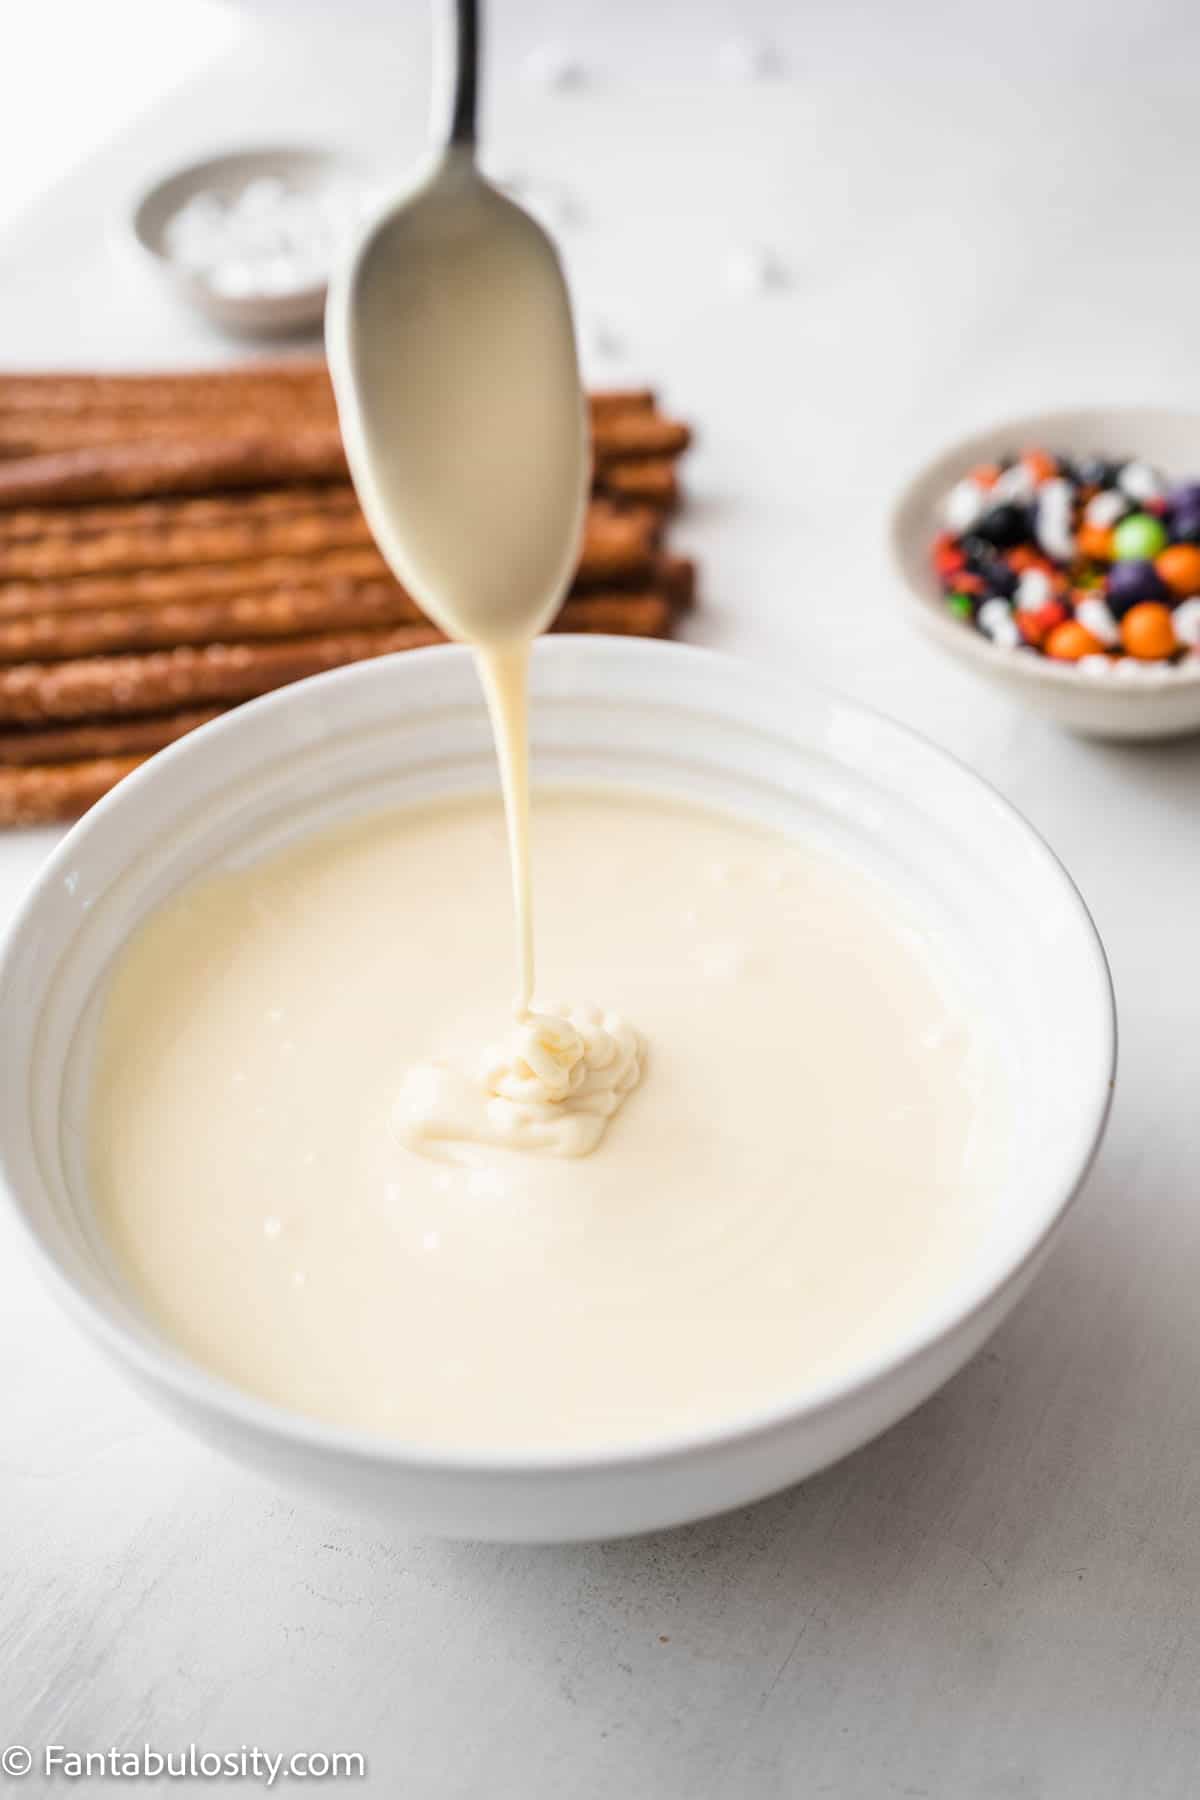 A bowl of melted white chocolate is in the center with a spoon being pulled from the chocolate. Halloween sprinkles and pretzel rods can be seen in the background.